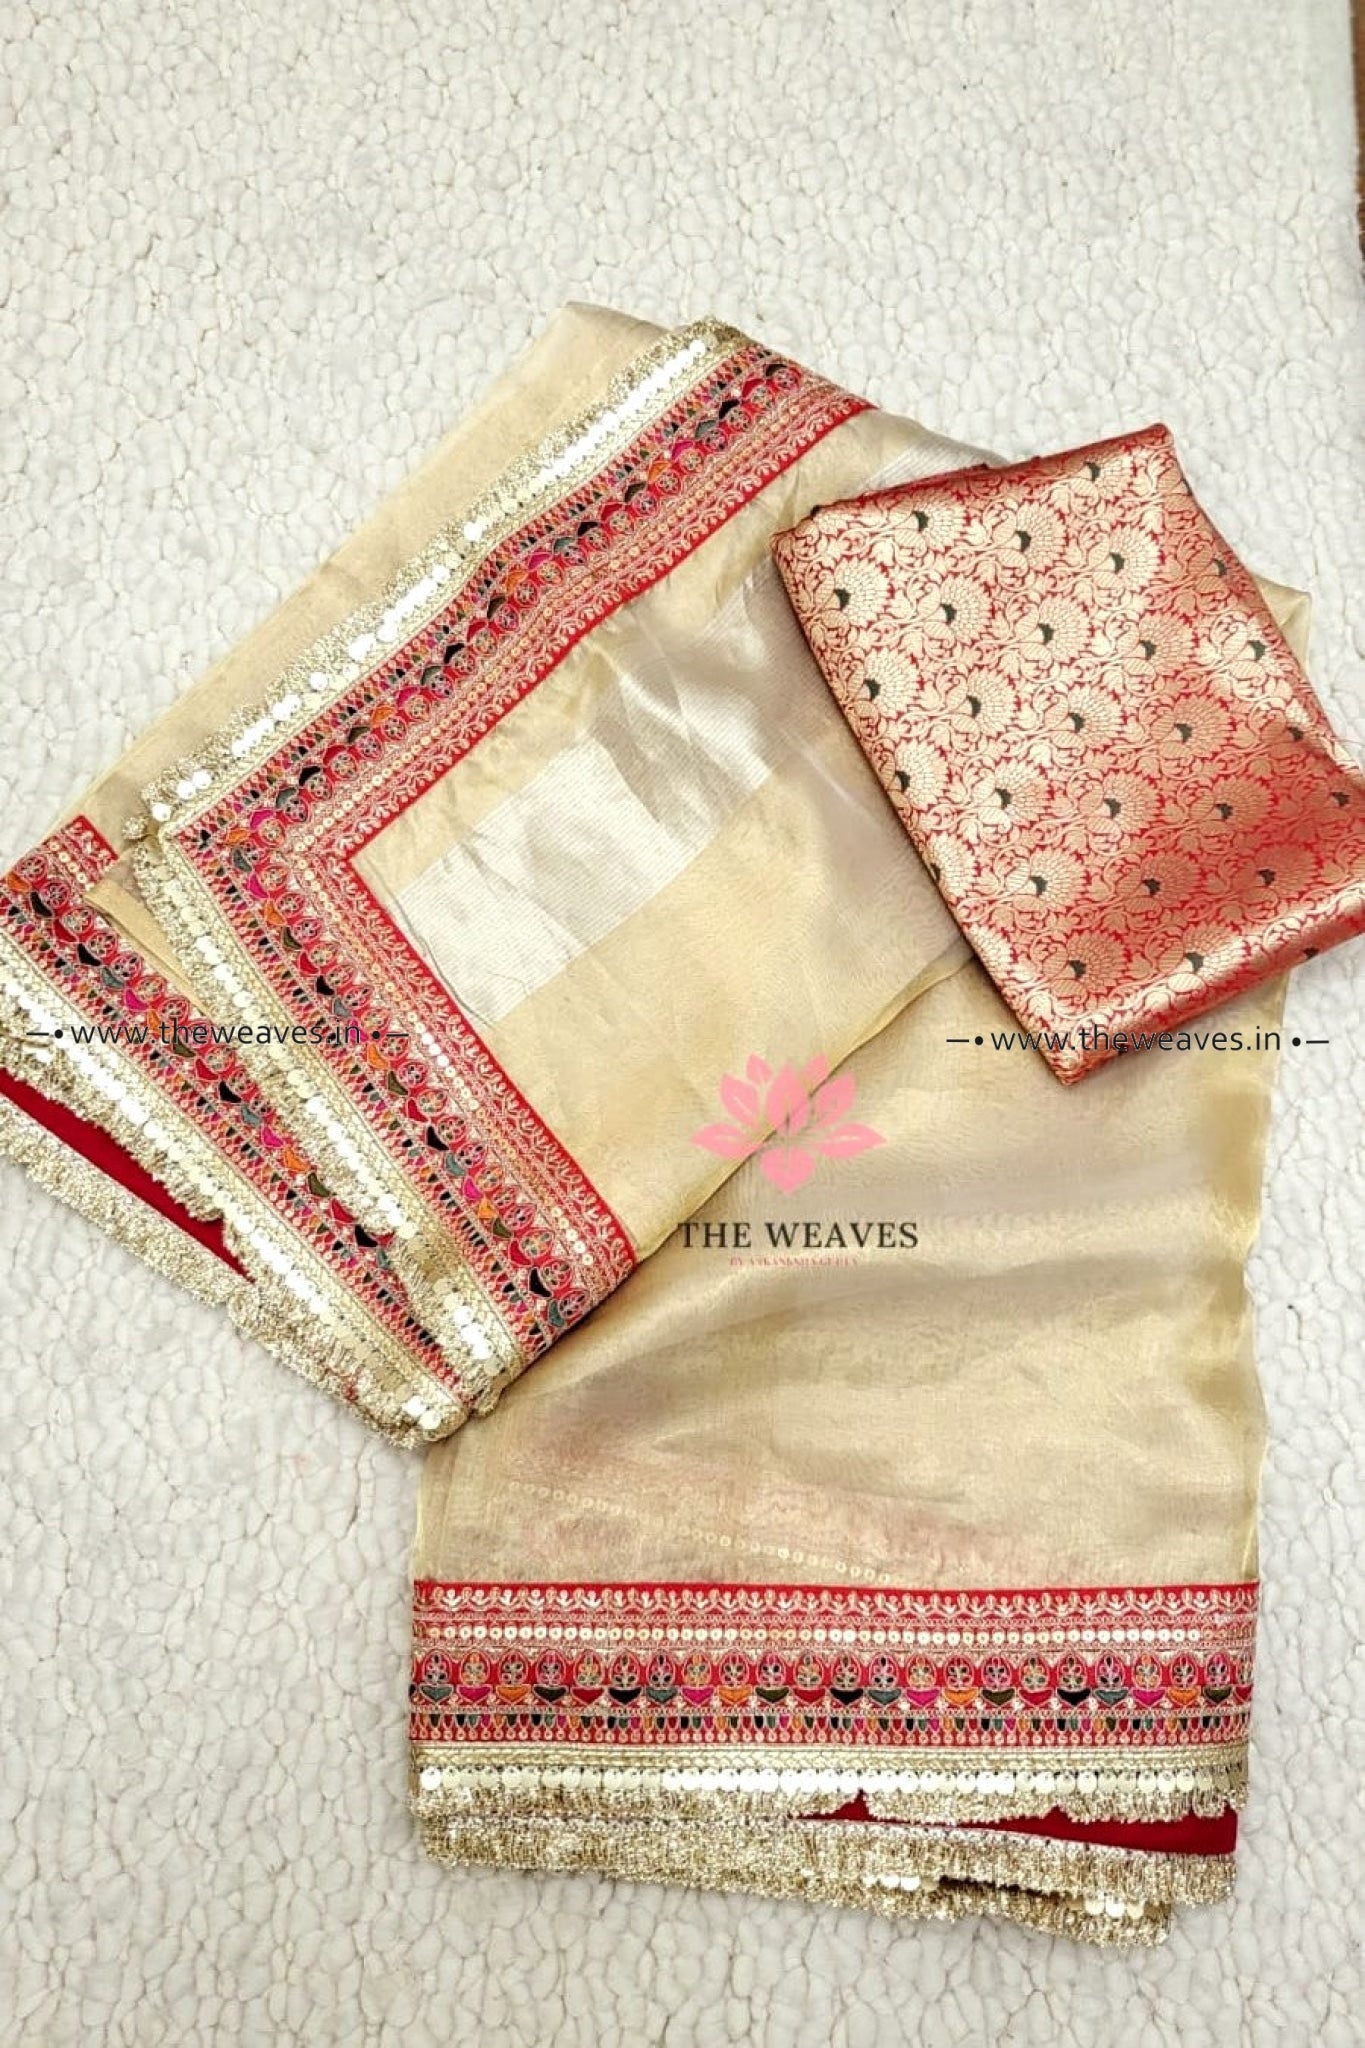 Handwoven Gold & Red Tissue Organza Saree With Borders